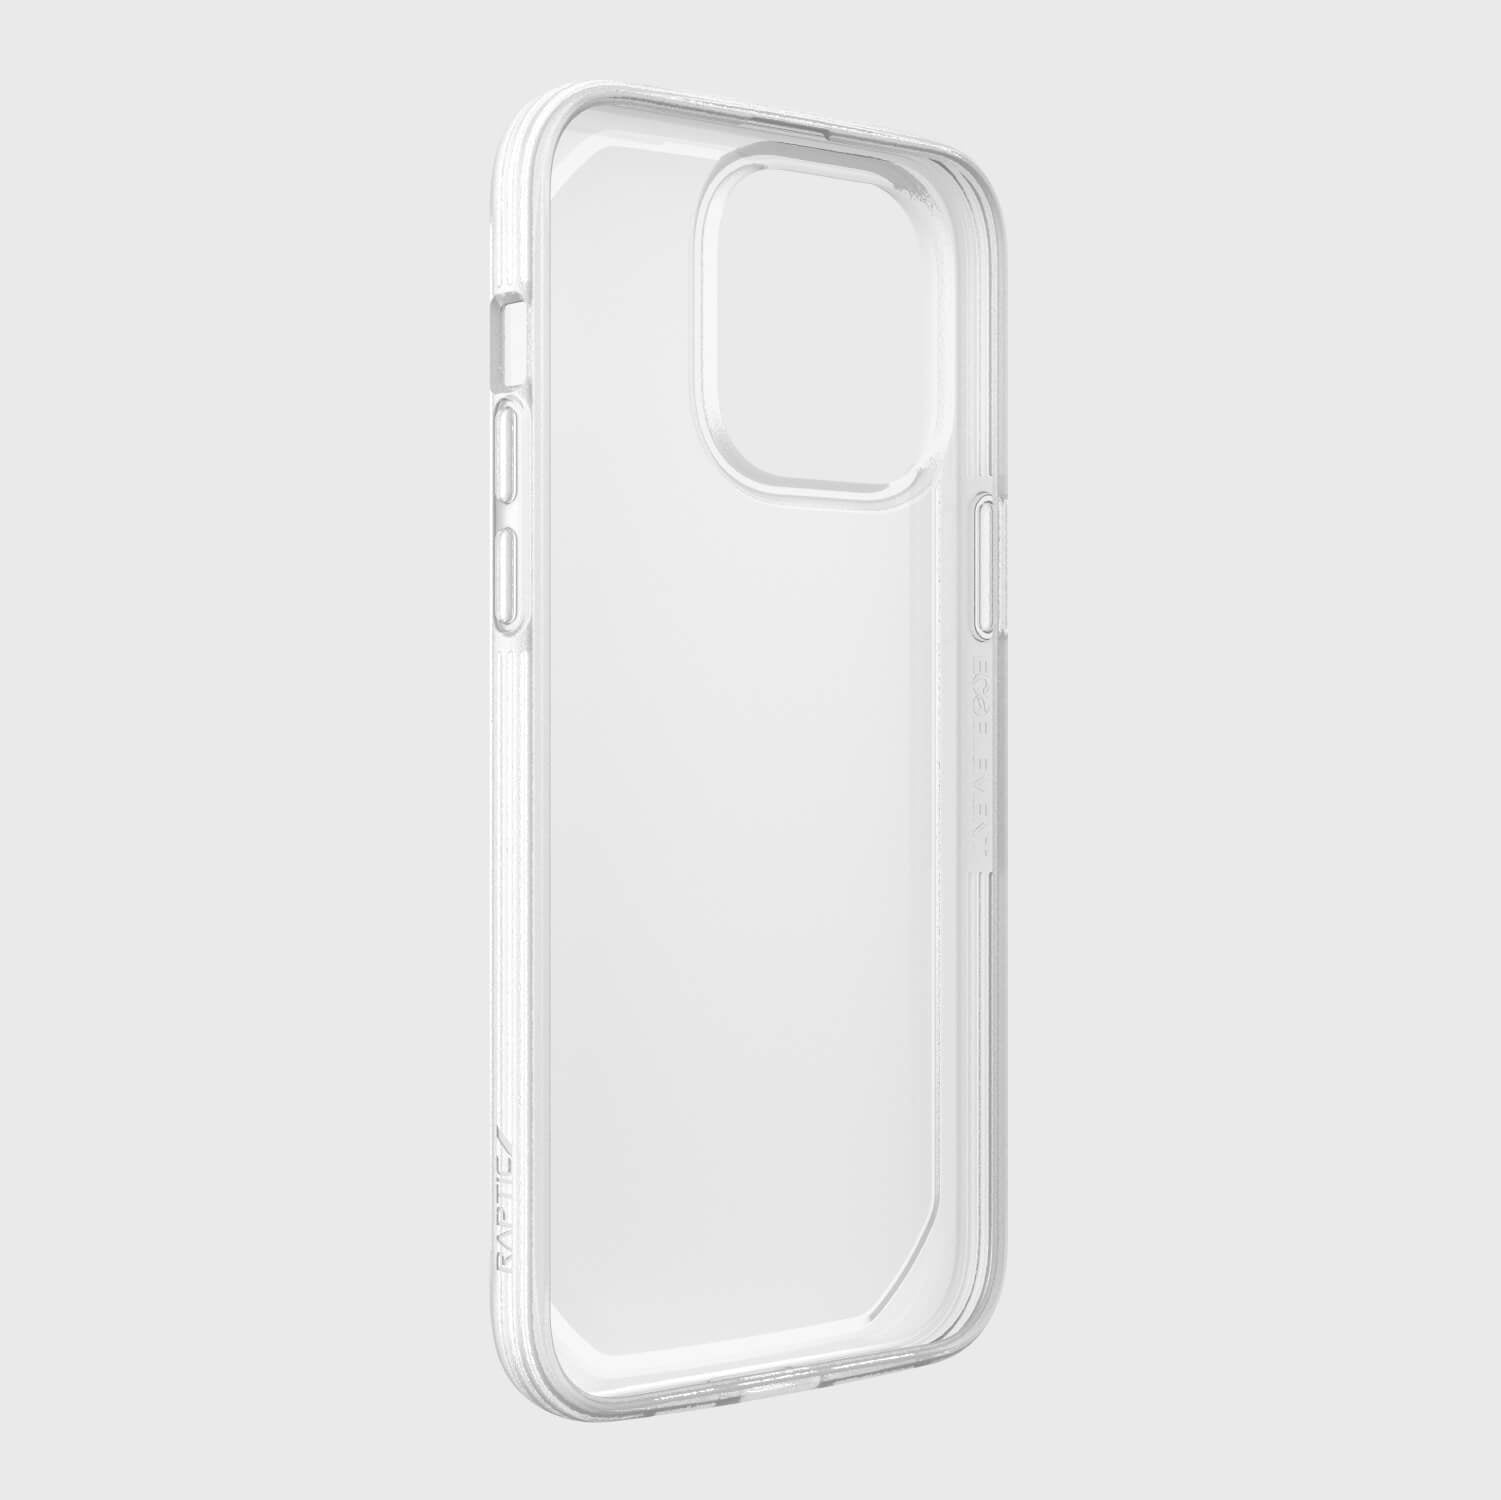 An environmentally friendly, clear iPhone 14 Pro Max case showcasing texturing depth on a white background from the brand Raptic.